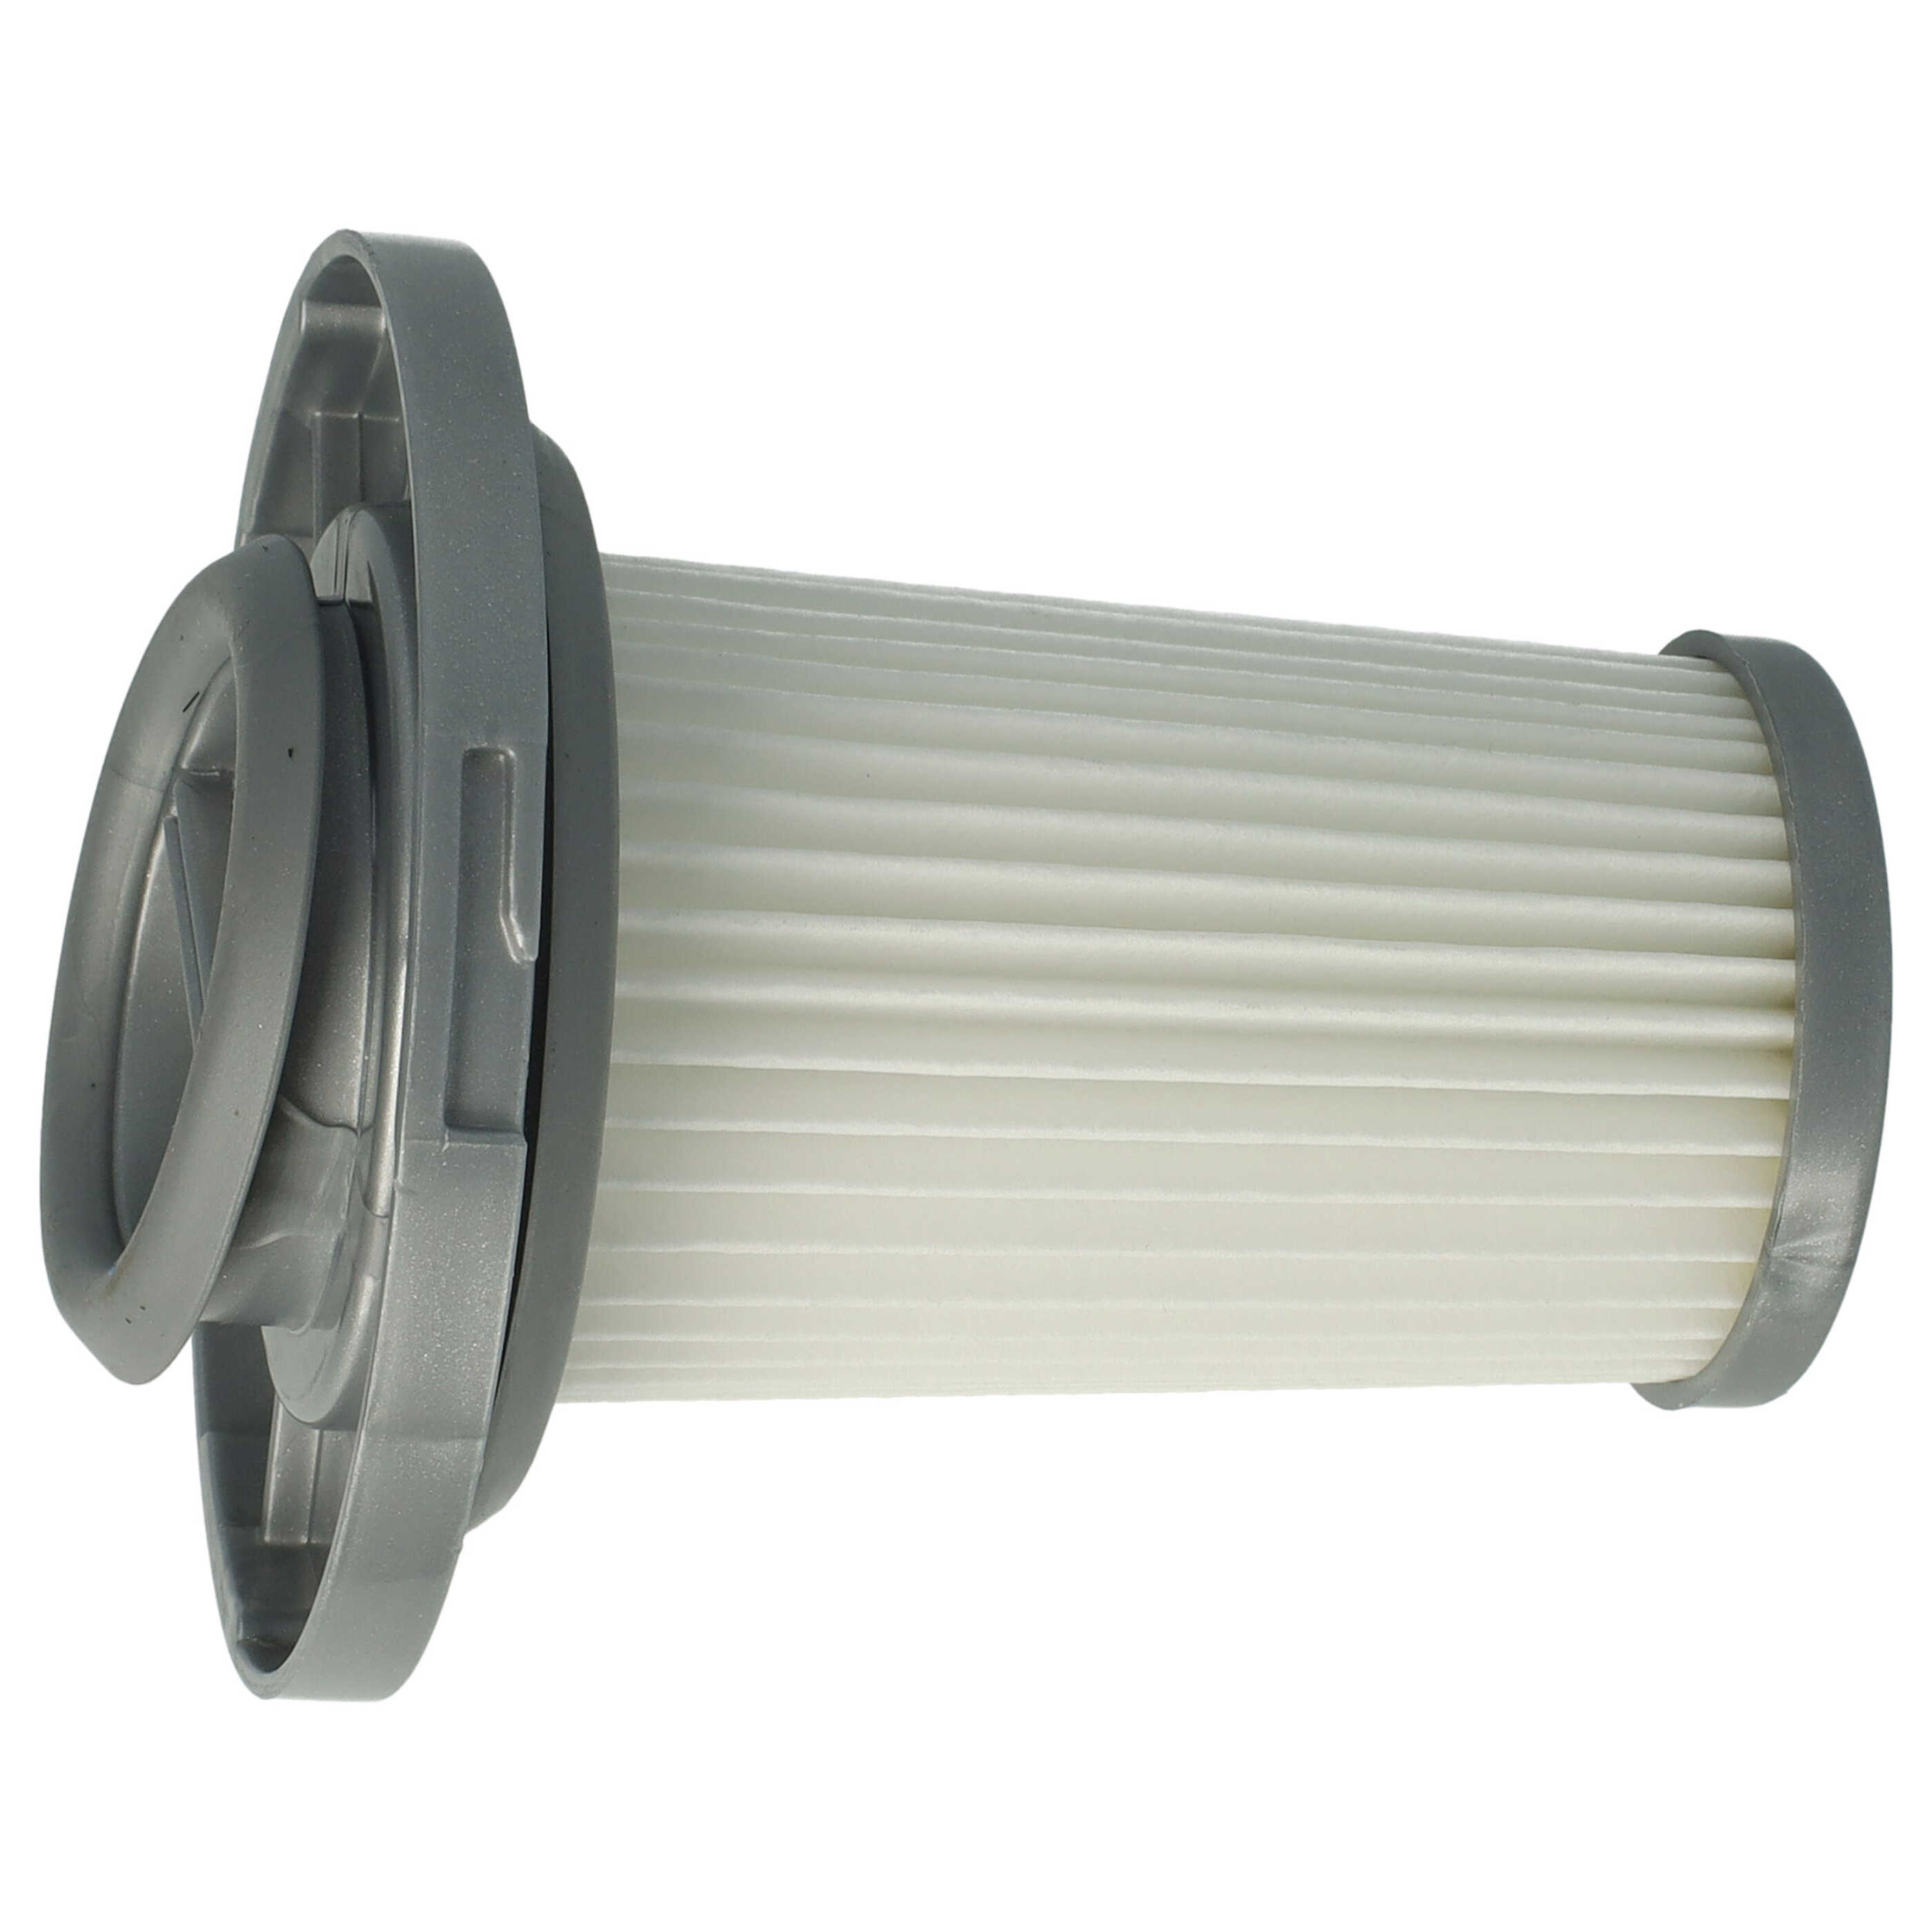 1x cartridge filter replaces Rowenta ZR009005 for RowentaVacuum Cleaner